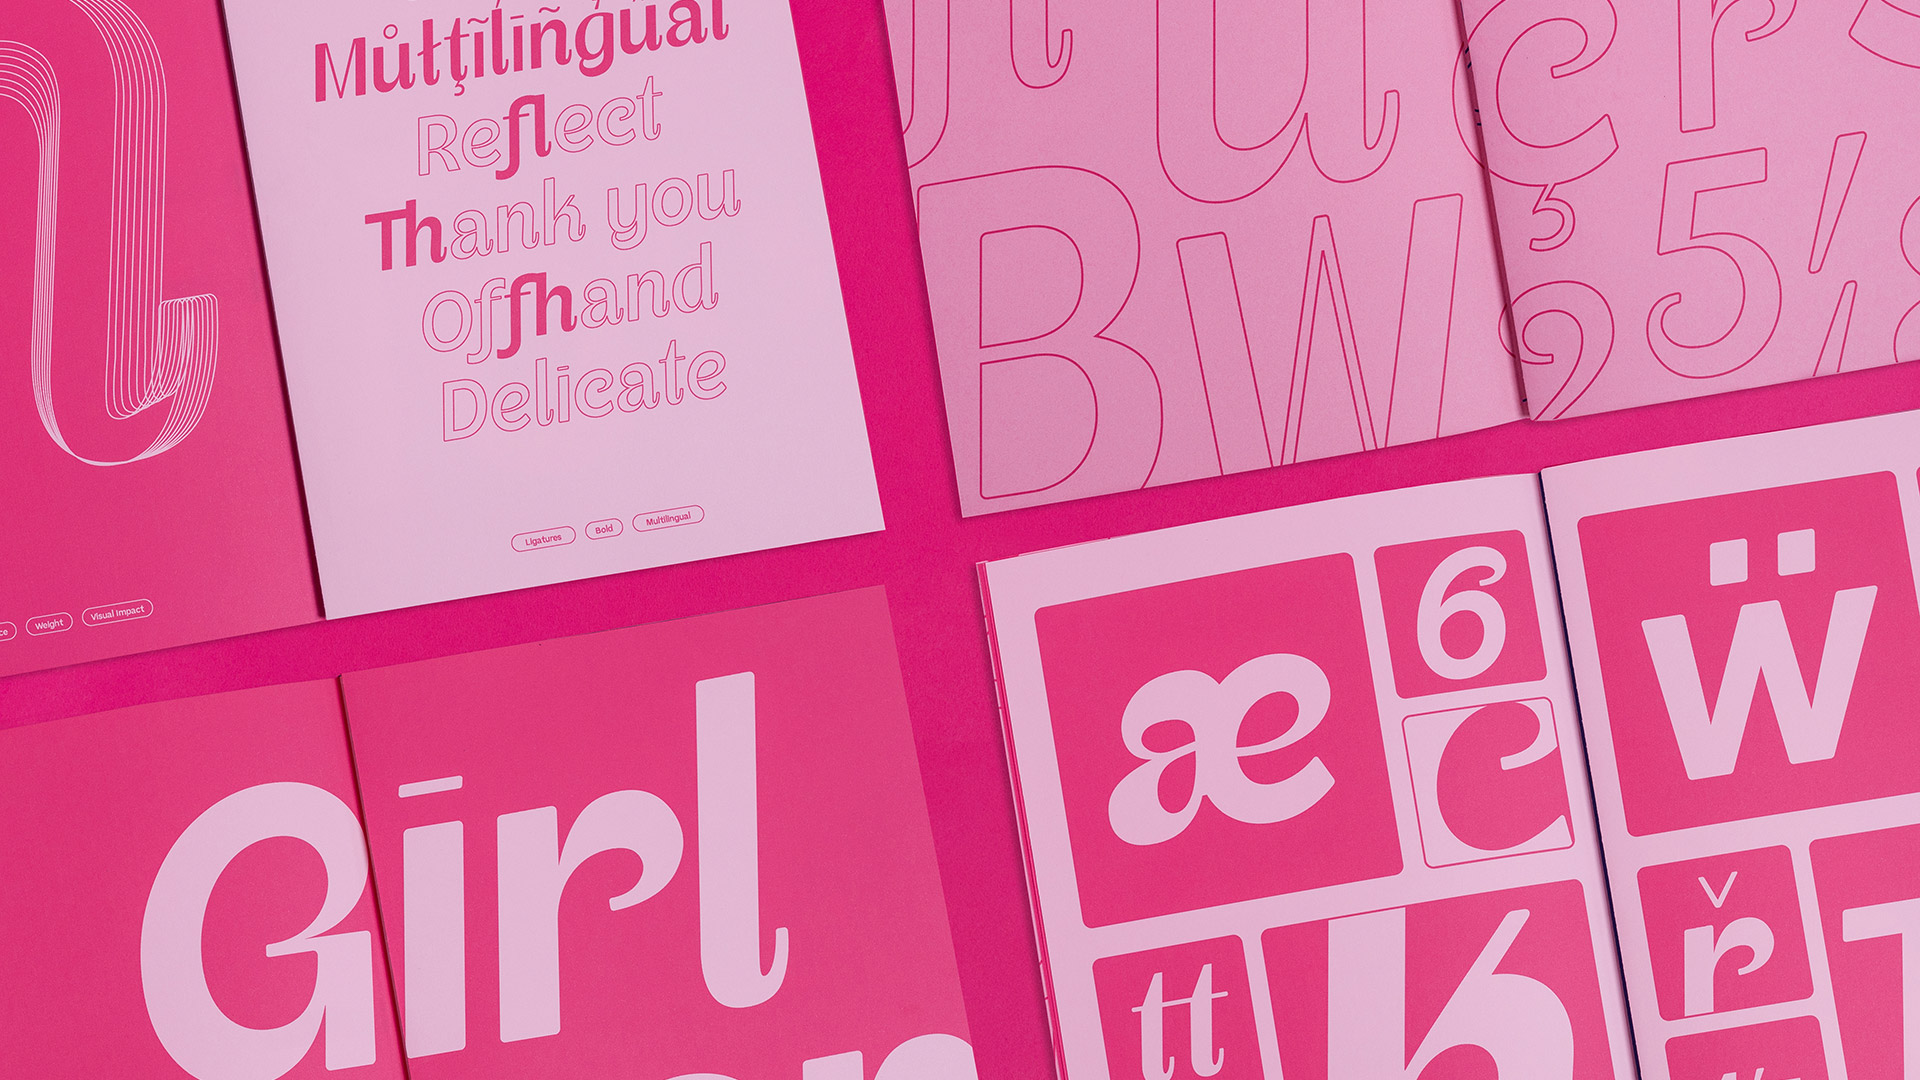 "This typeface is a tribute to transgender women" - Custom typefaces for Facialteam by KOBU Agency